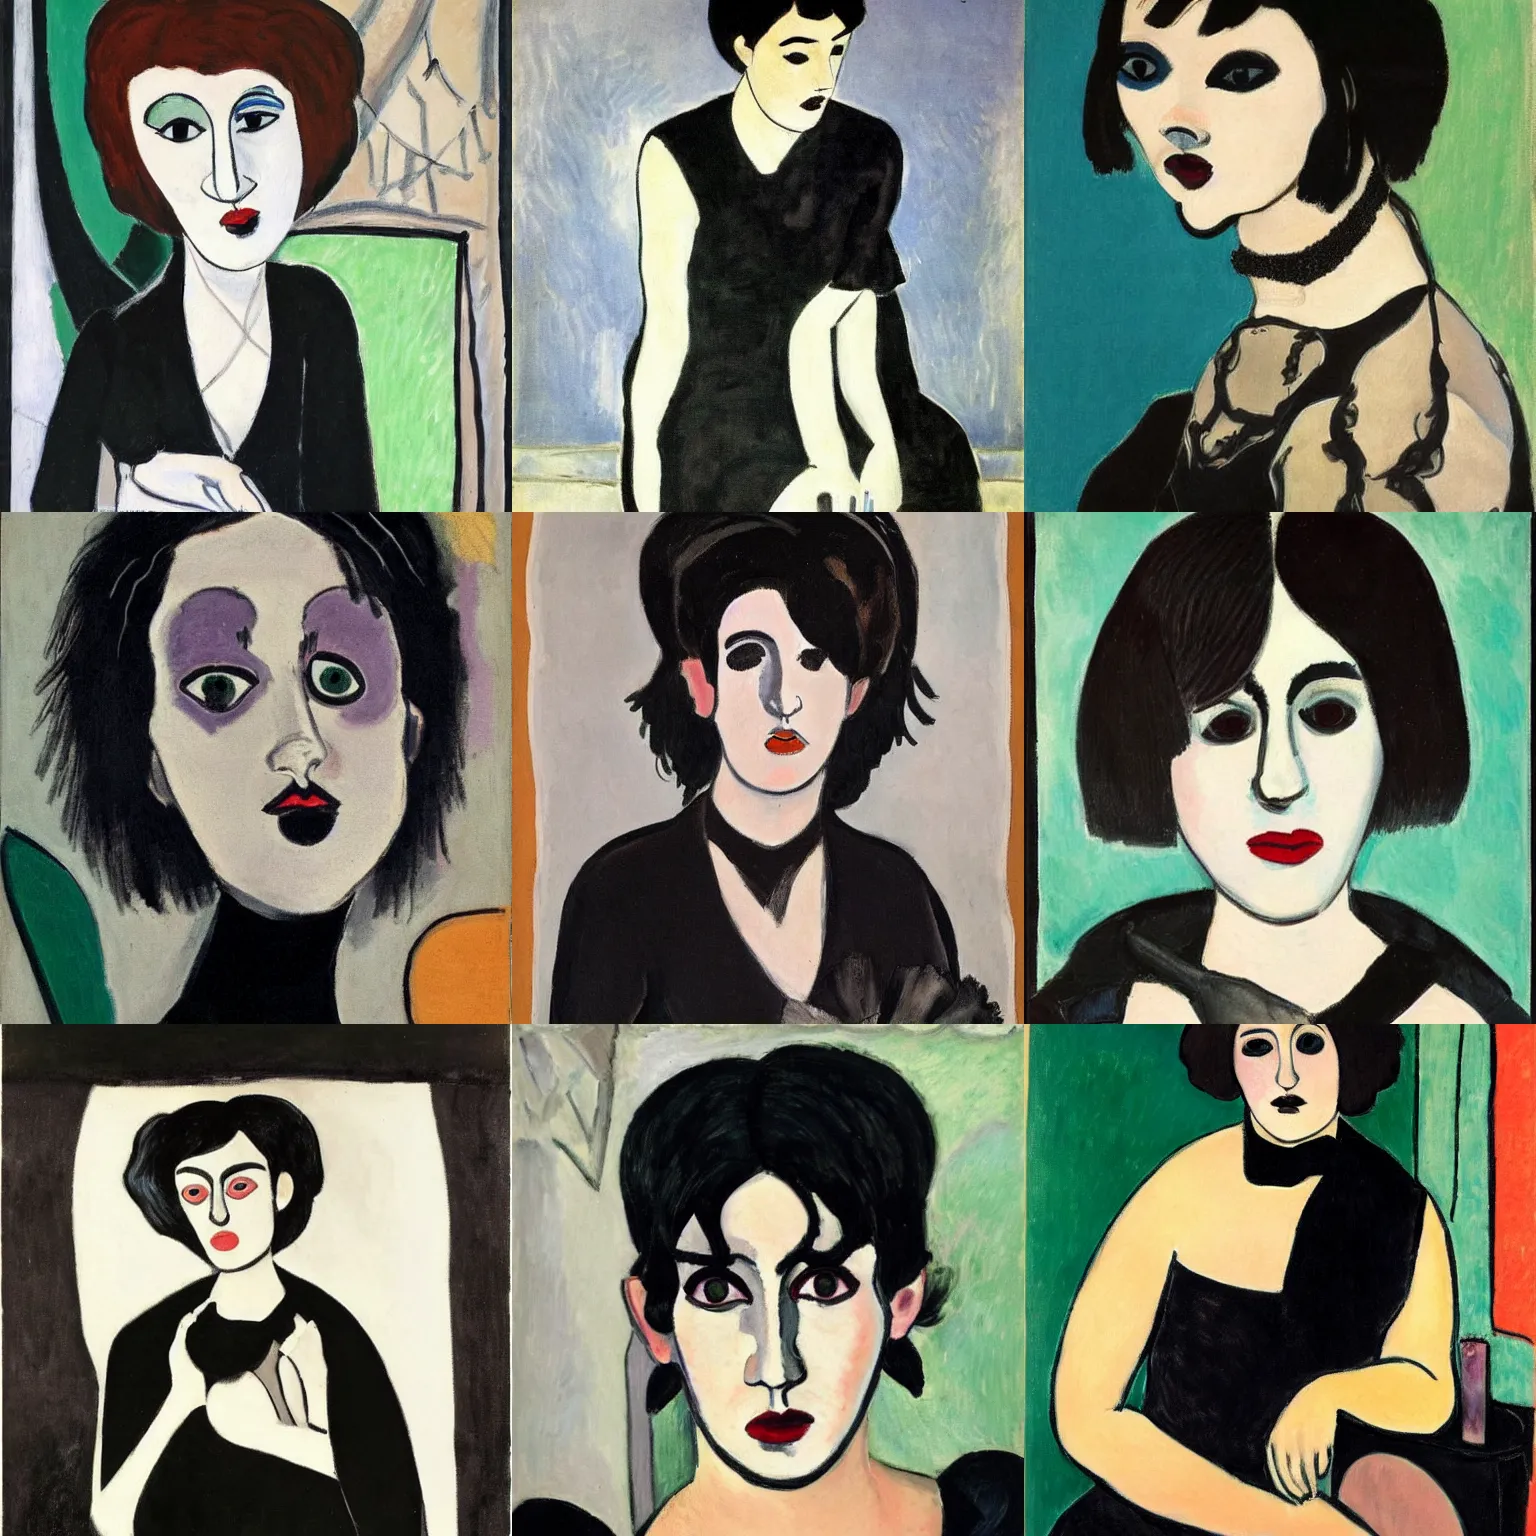 Prompt: A goth portrait painted by Henri Matisse. Her hair is dark brown and cut into a short, messy pixie cut. She has a slightly rounded face, with a pointed chin, large entirely-black eyes, and a small nose. She is wearing a black tank top, a black leather jacket, a black knee-length skirt, a black choker, and black leather boots.